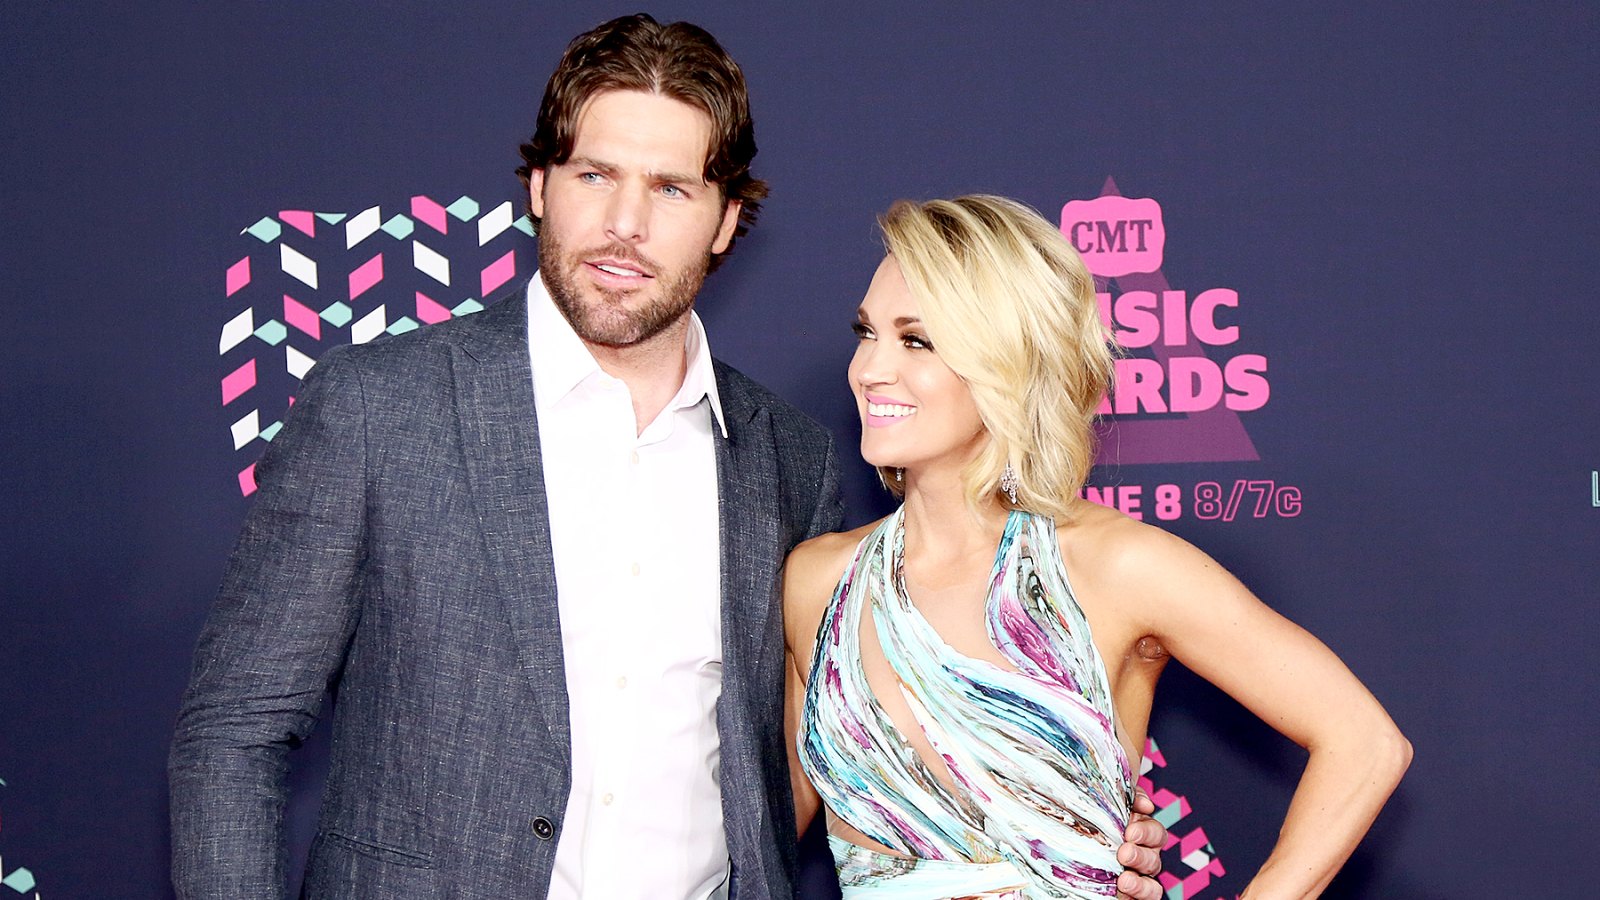 Mike-Fisher-and-Carrie-Underwood